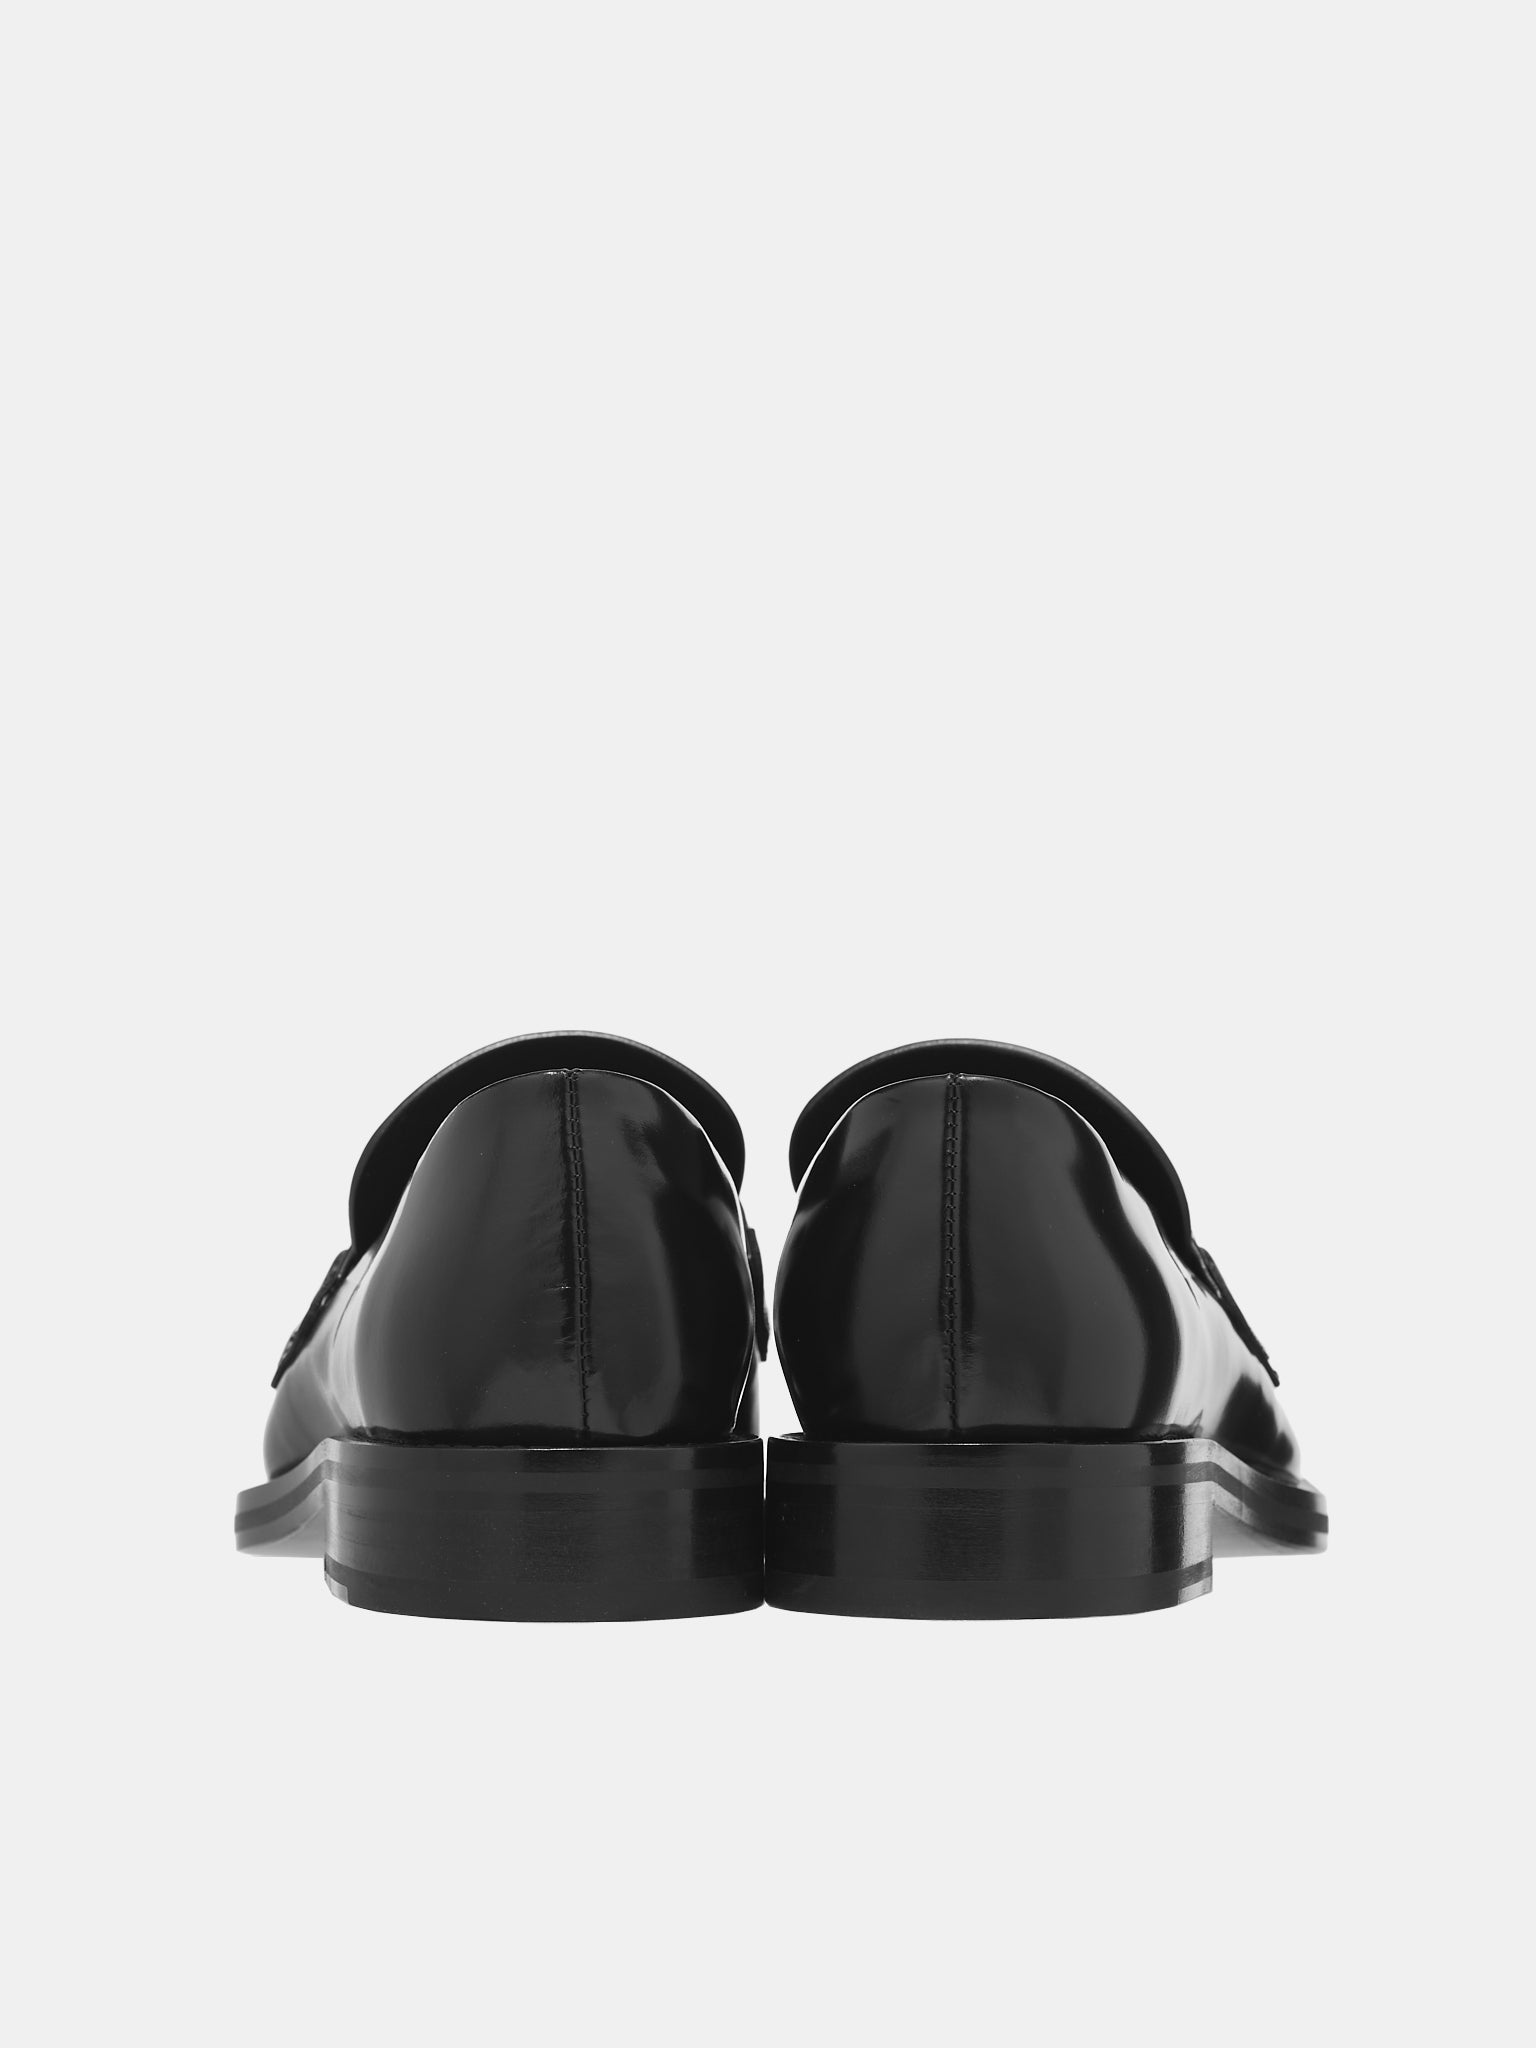 Square Toe Loafers (CMR1026-BLAHSH)